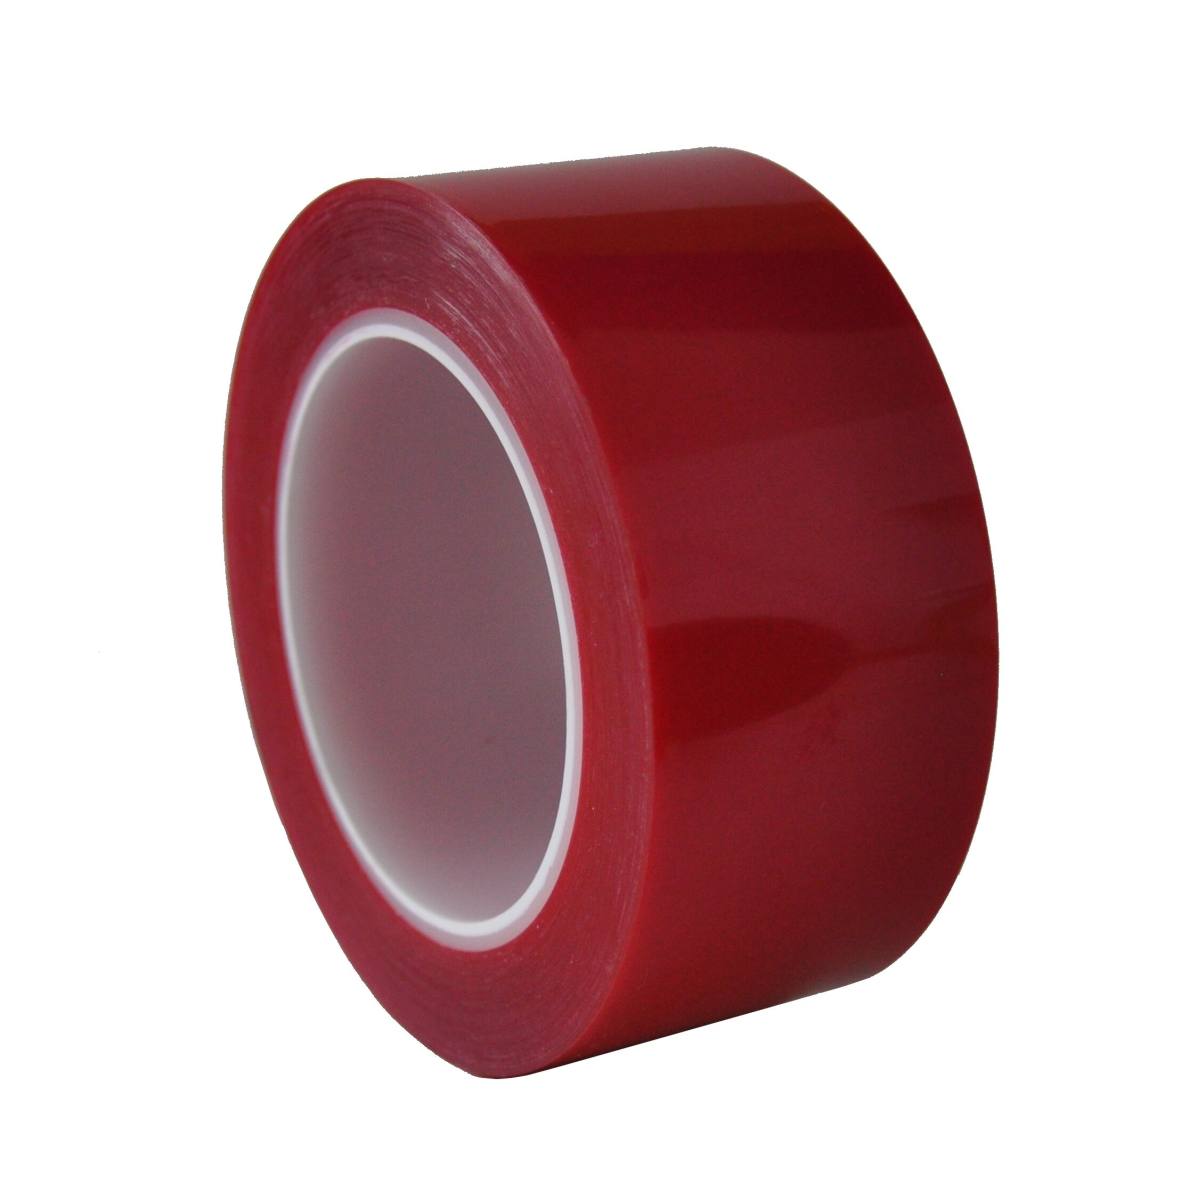 S-K-S 208R polyester plakband, 50mmx66m, rood